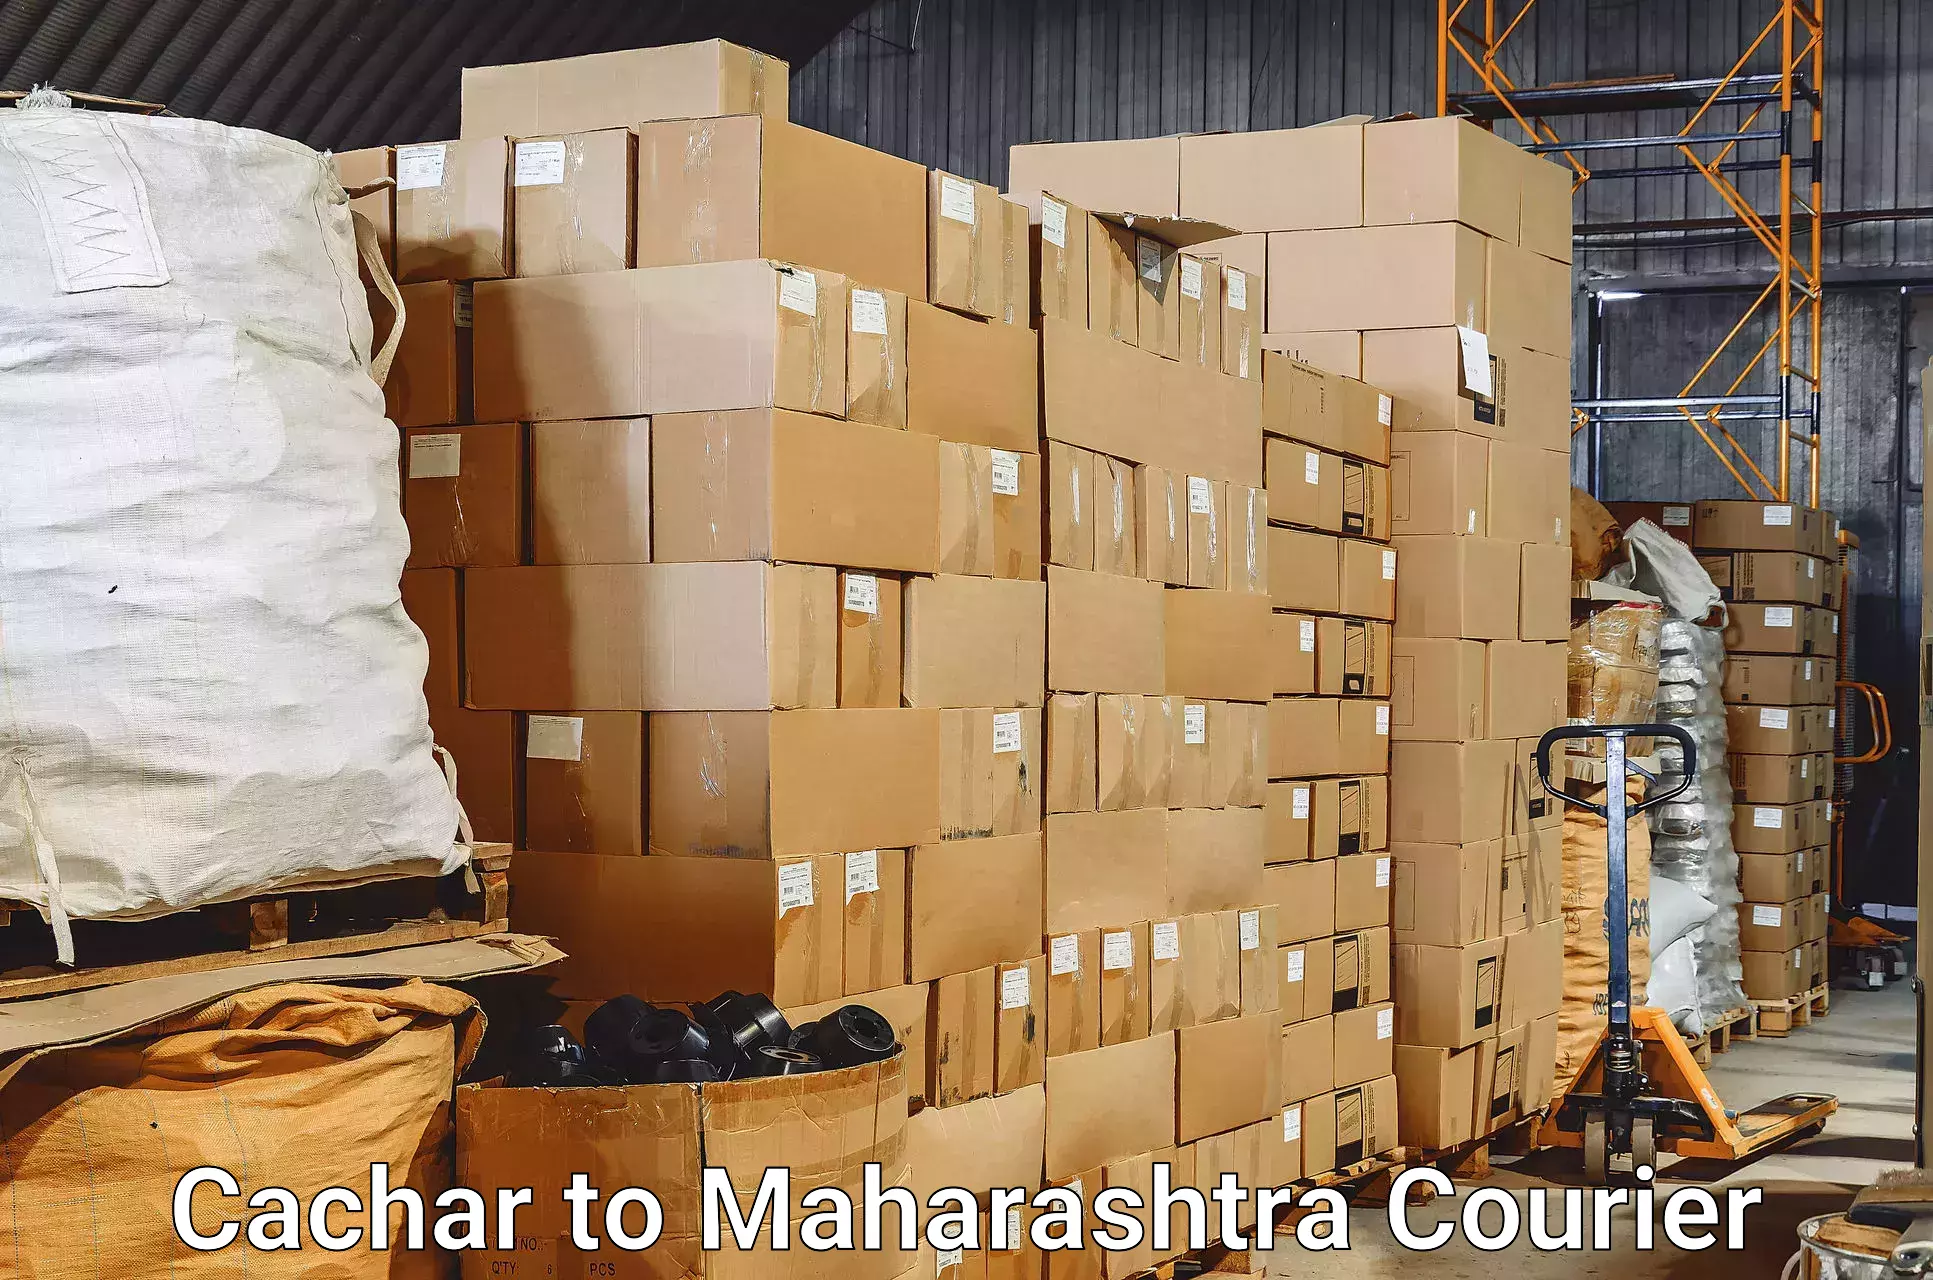 Baggage shipping schedule Cachar to Bhandara